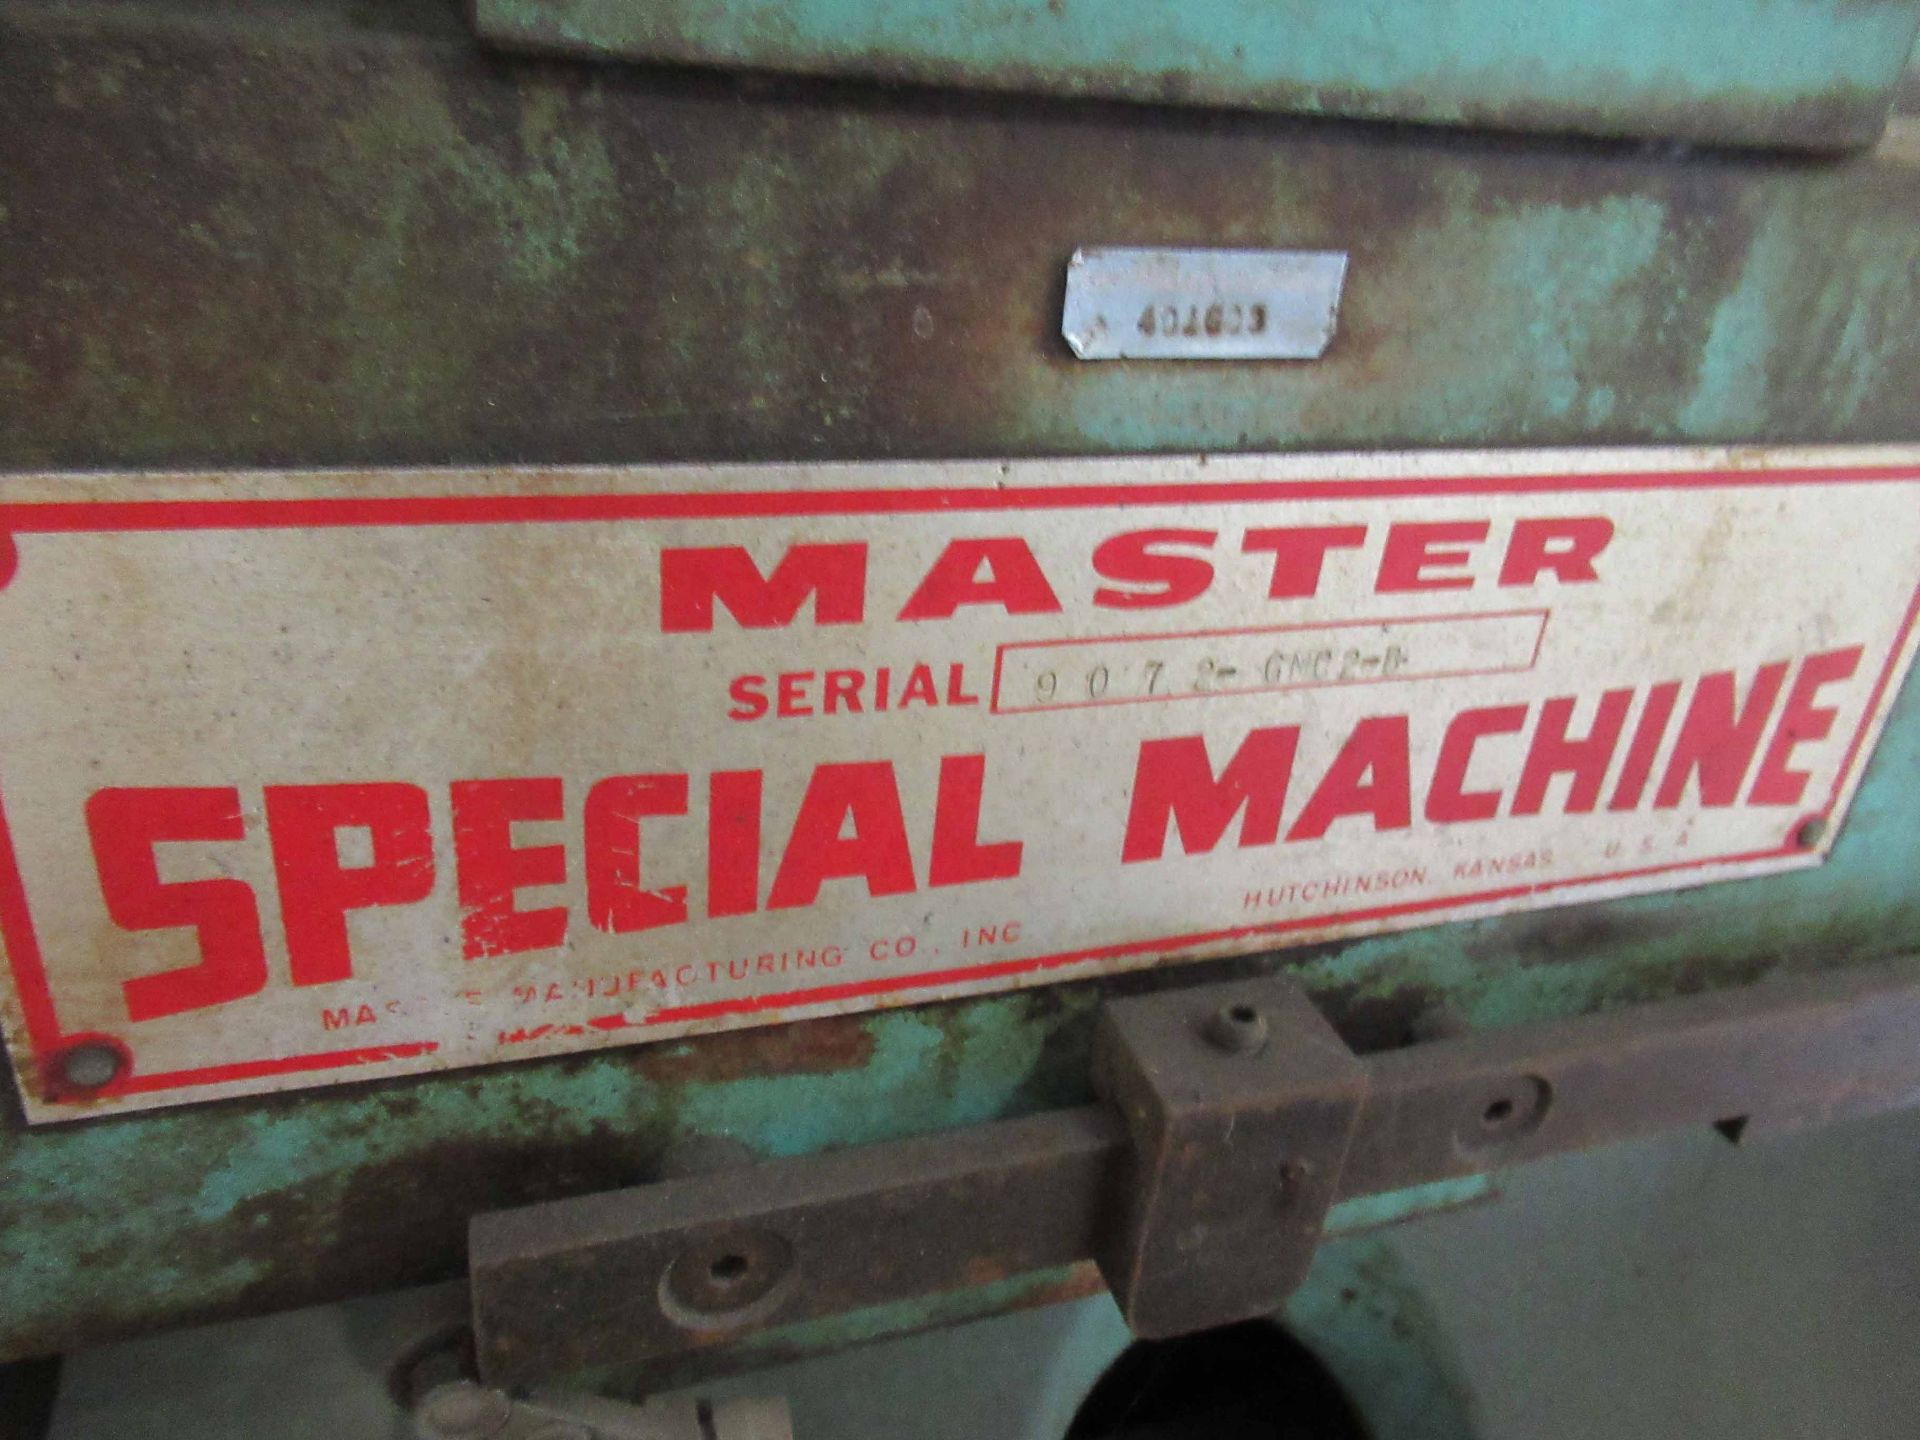 PORTABLE BORING MILL, MASTER "SPECIAL MACHINE", facing head, 32" swing, S/N GMC-B, (Location 4: - Image 2 of 2